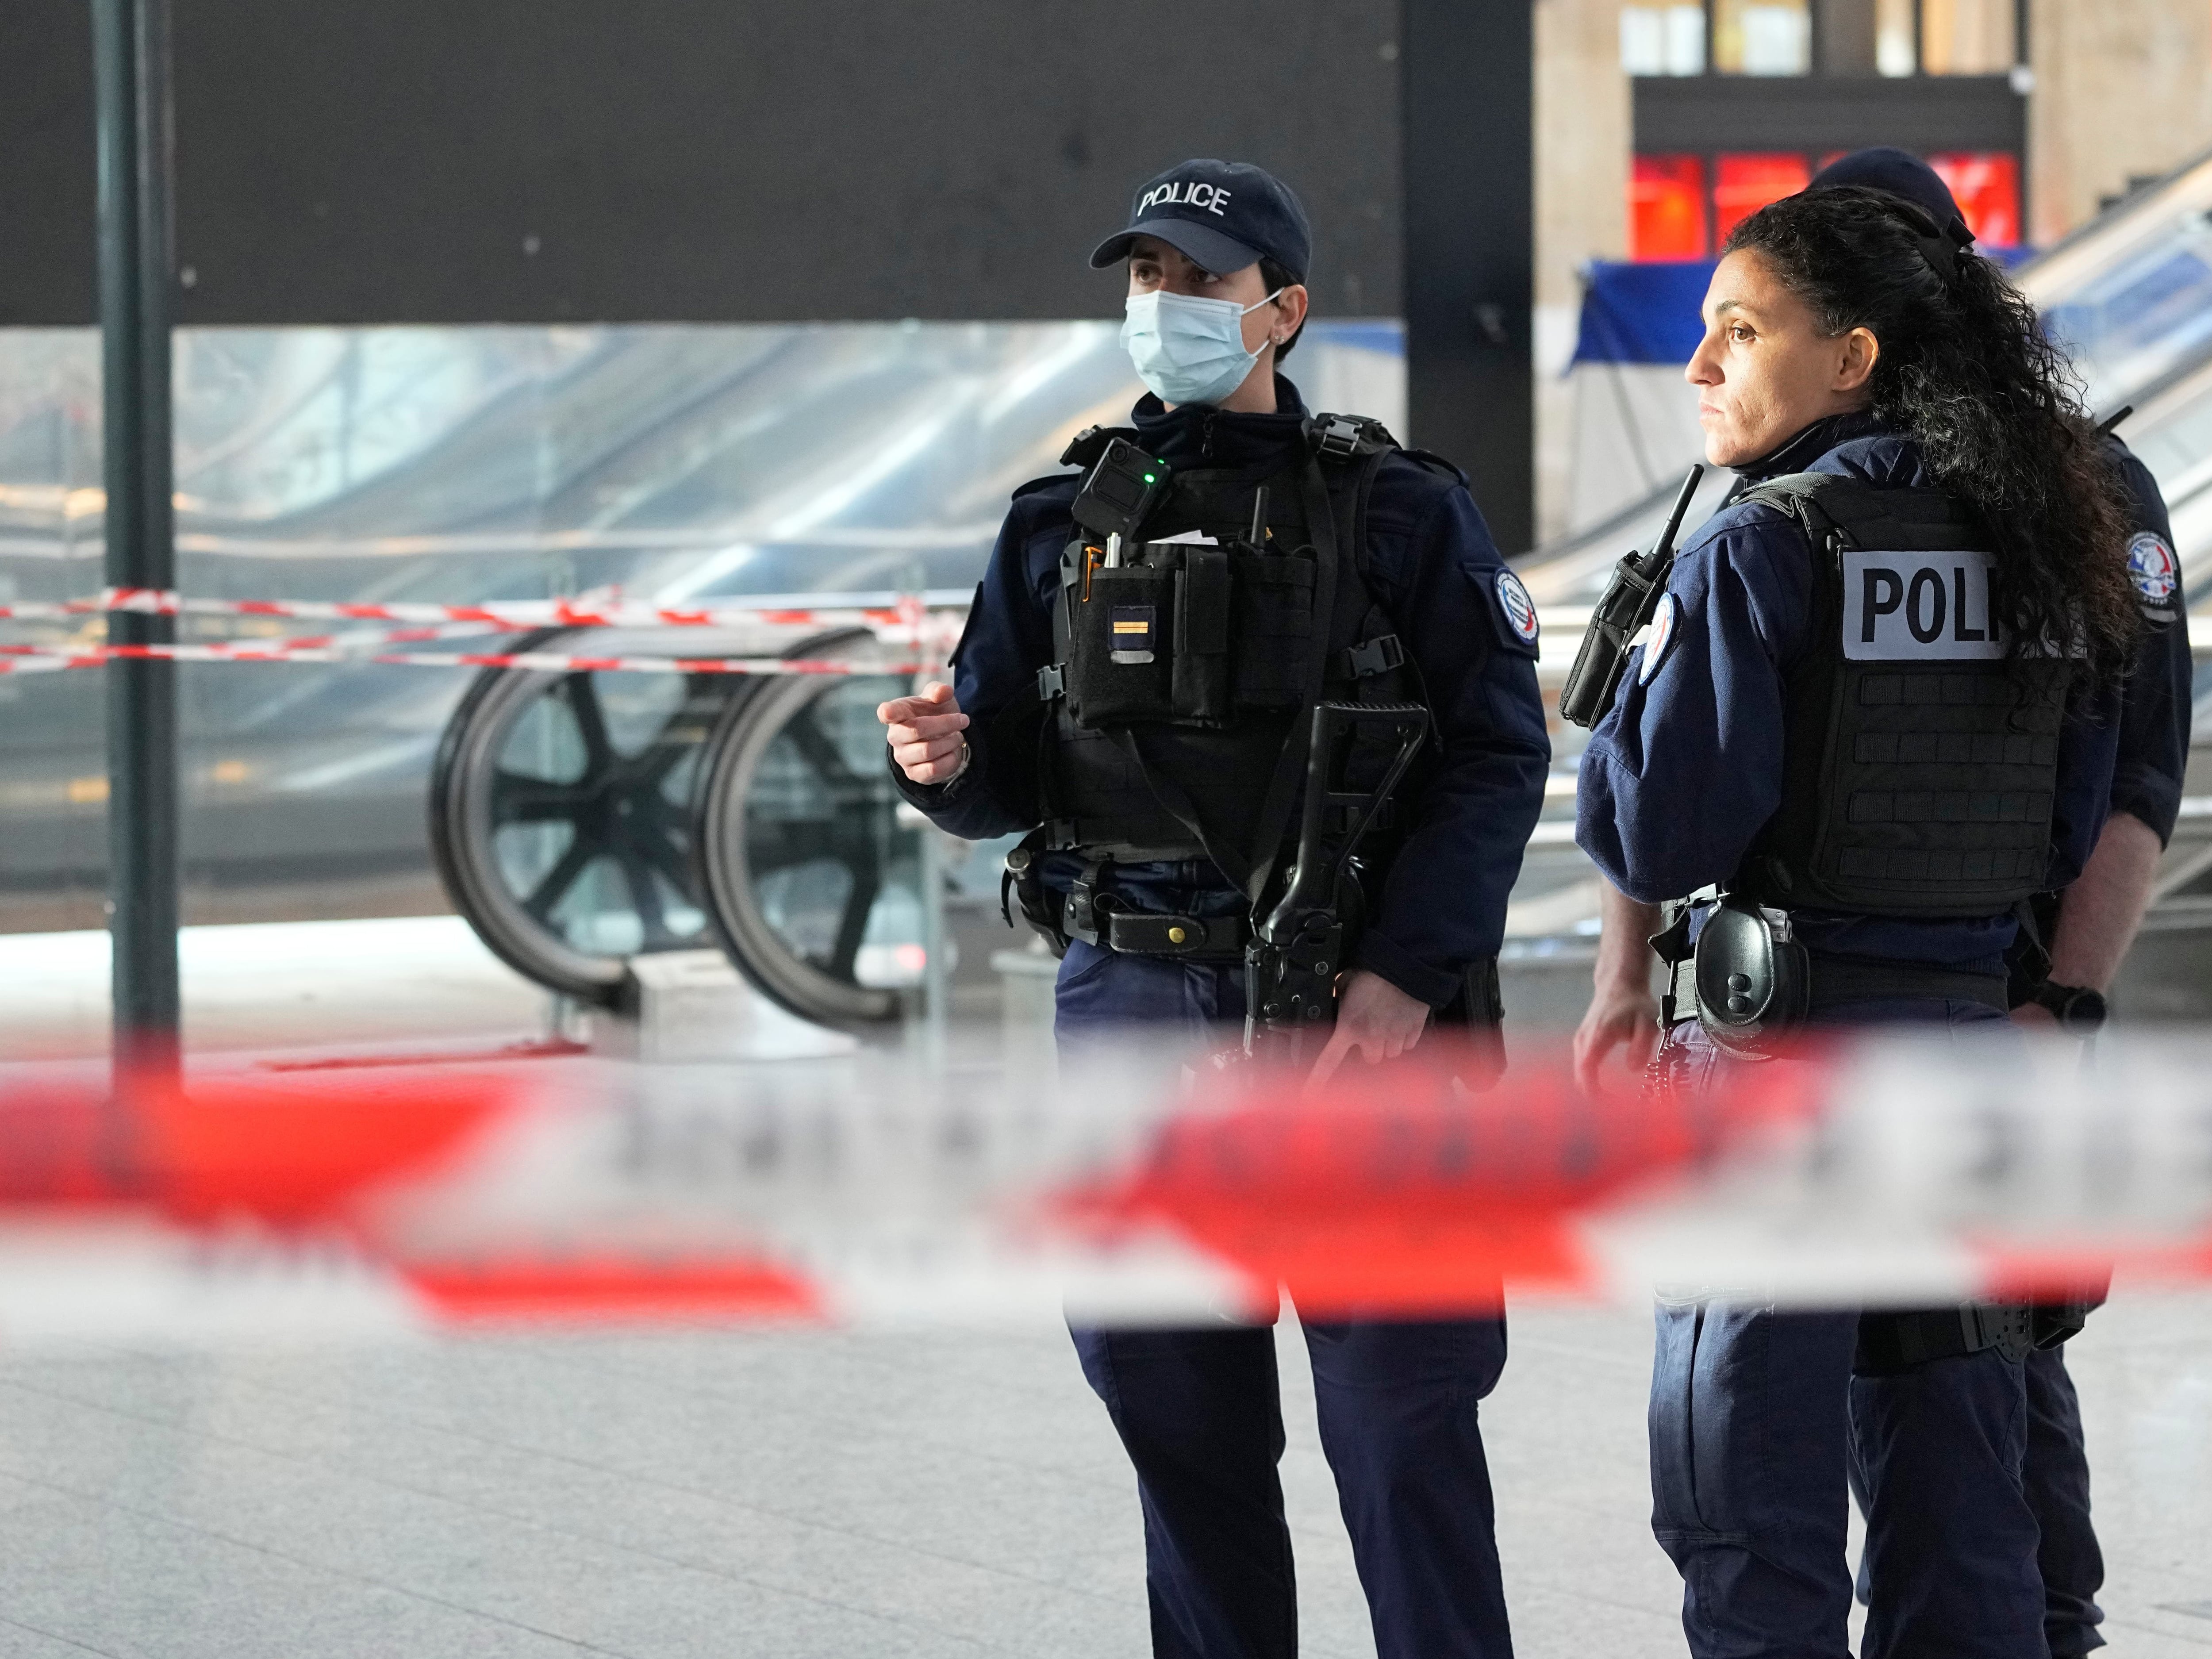 Attacker shot by police after six stabbed at Paris railway station